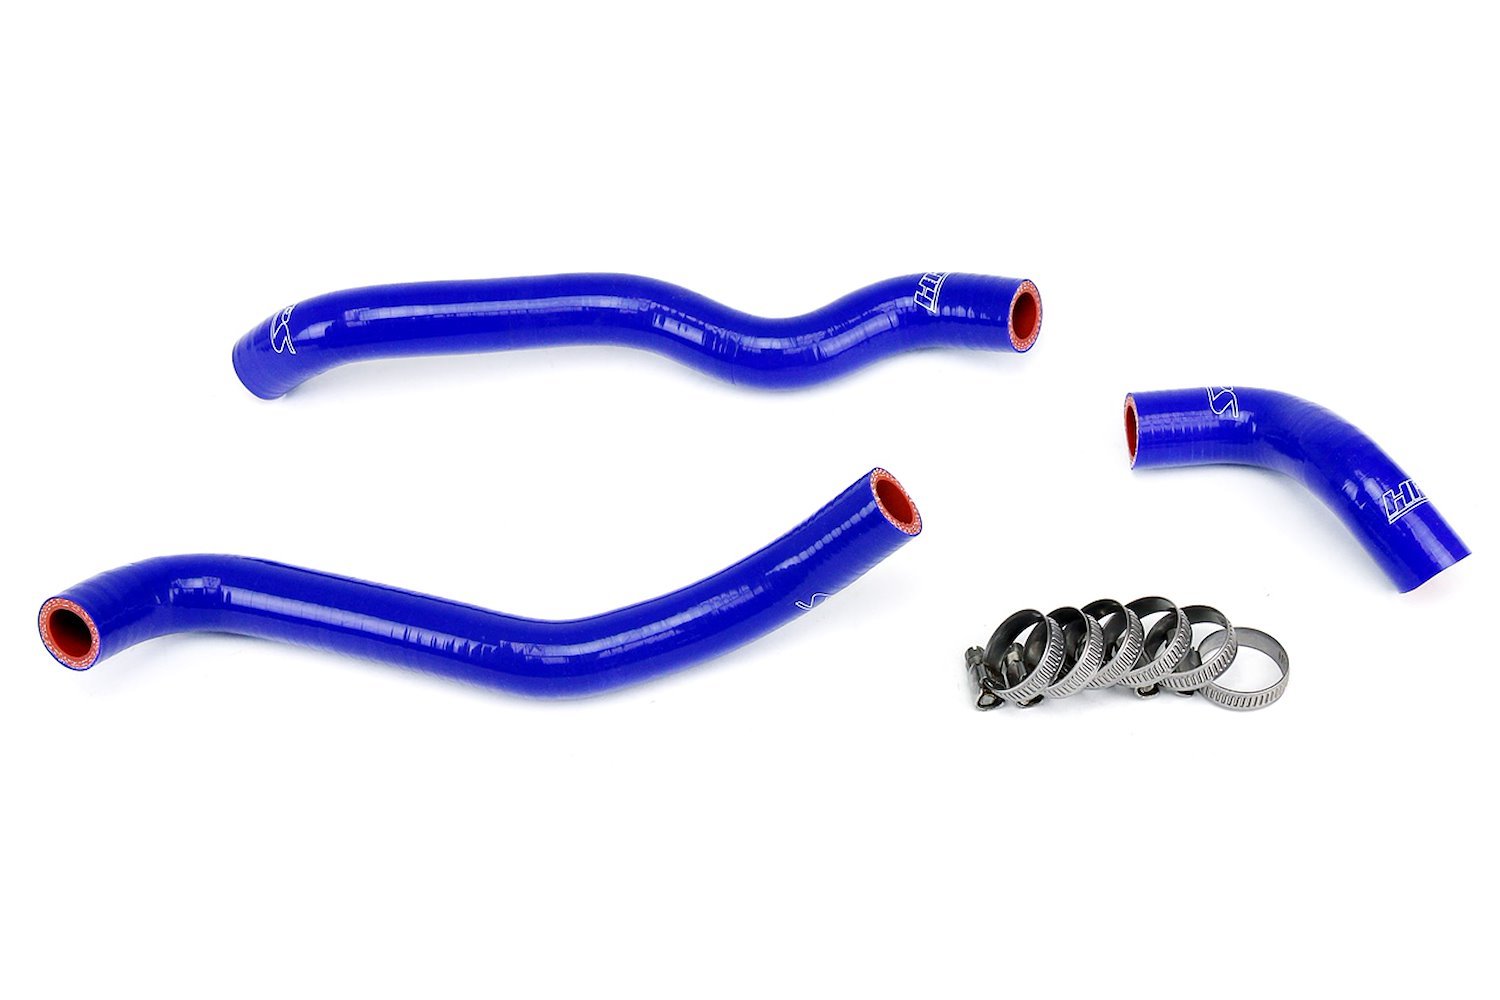 57-1435-BLUE Heater Hose Kit, High-Temp 3-Ply Reinforced Silicone, Replace OEM Rubber Heater Coolant Hoses